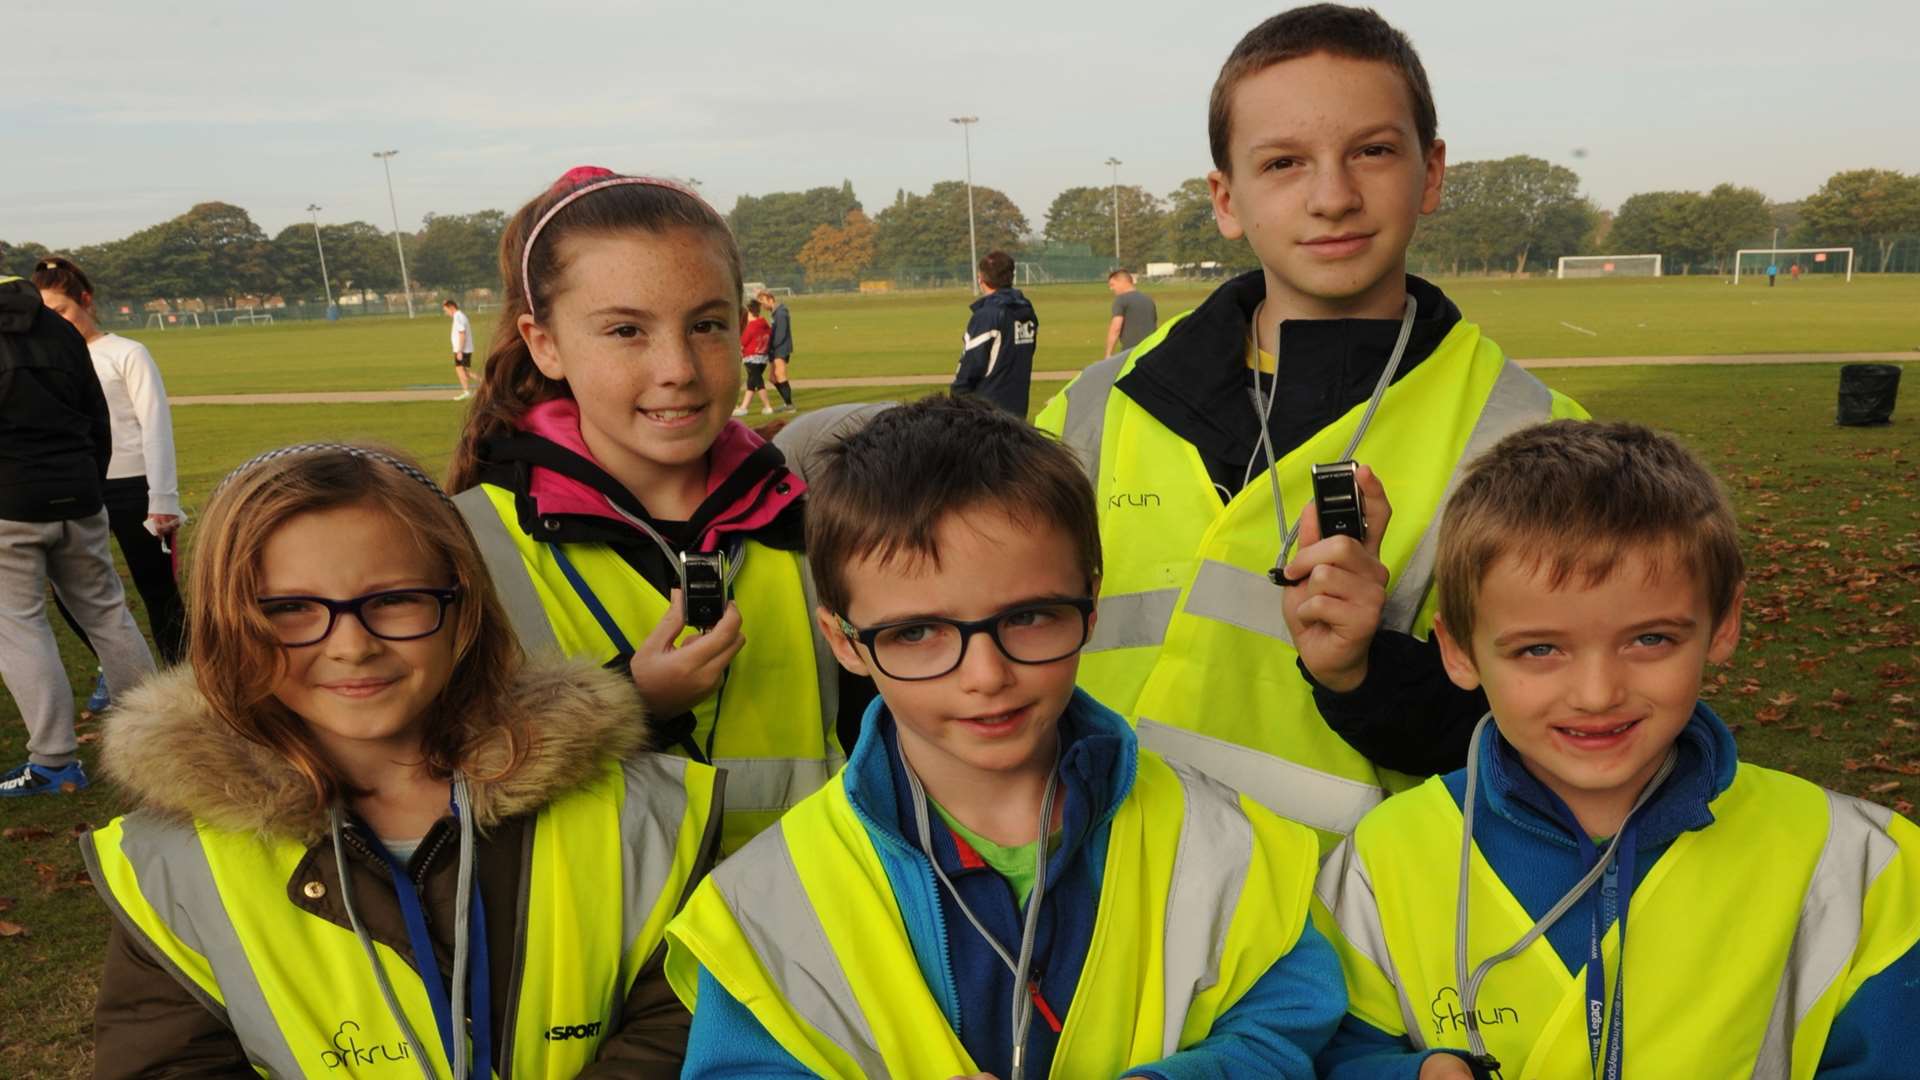 The junior runners were marshals and time-keepers